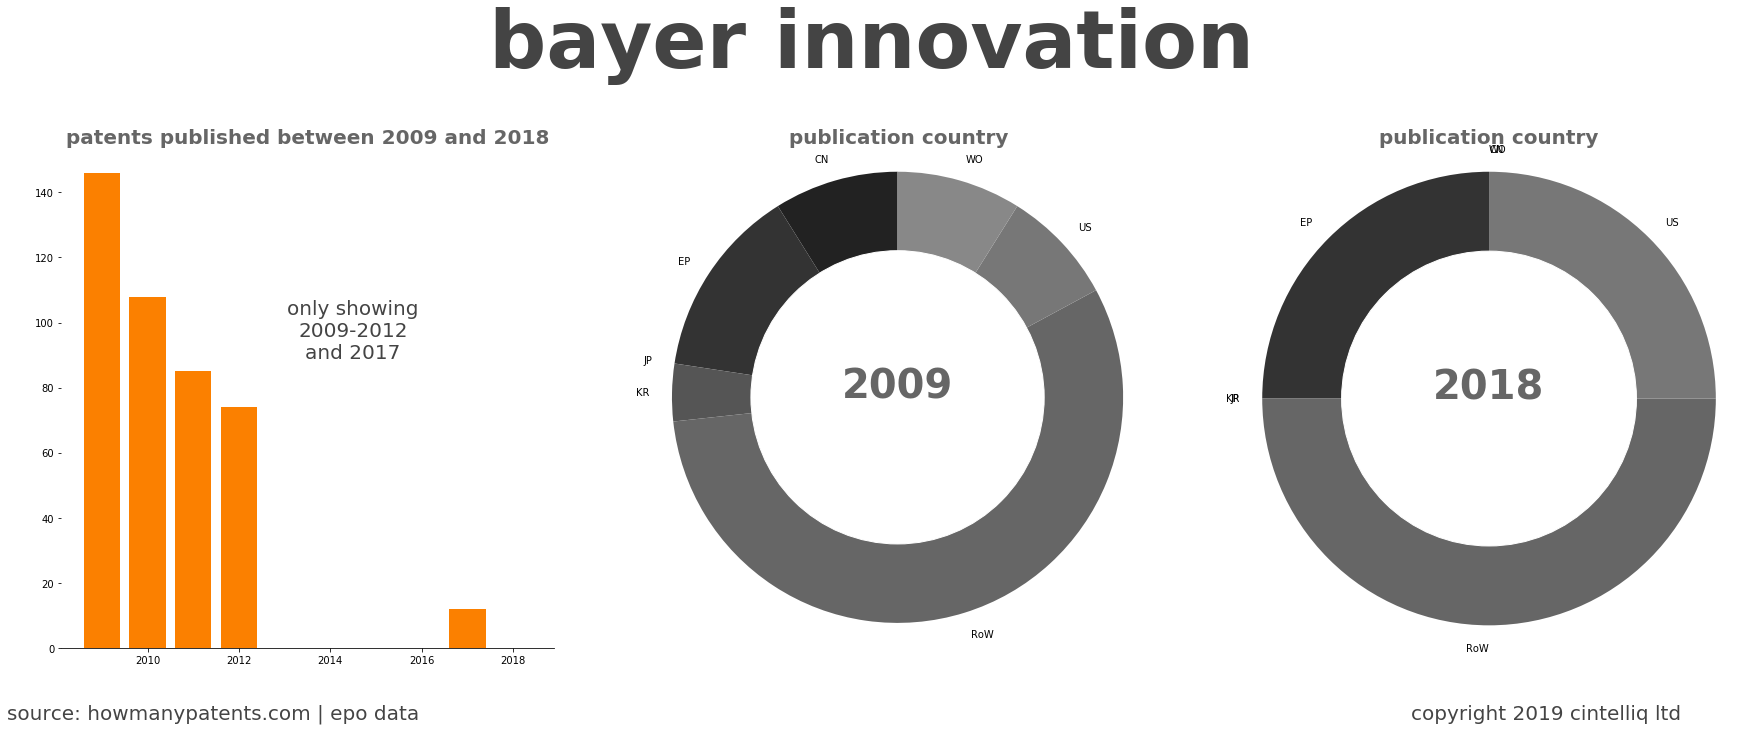 summary of patents for Bayer Innovation